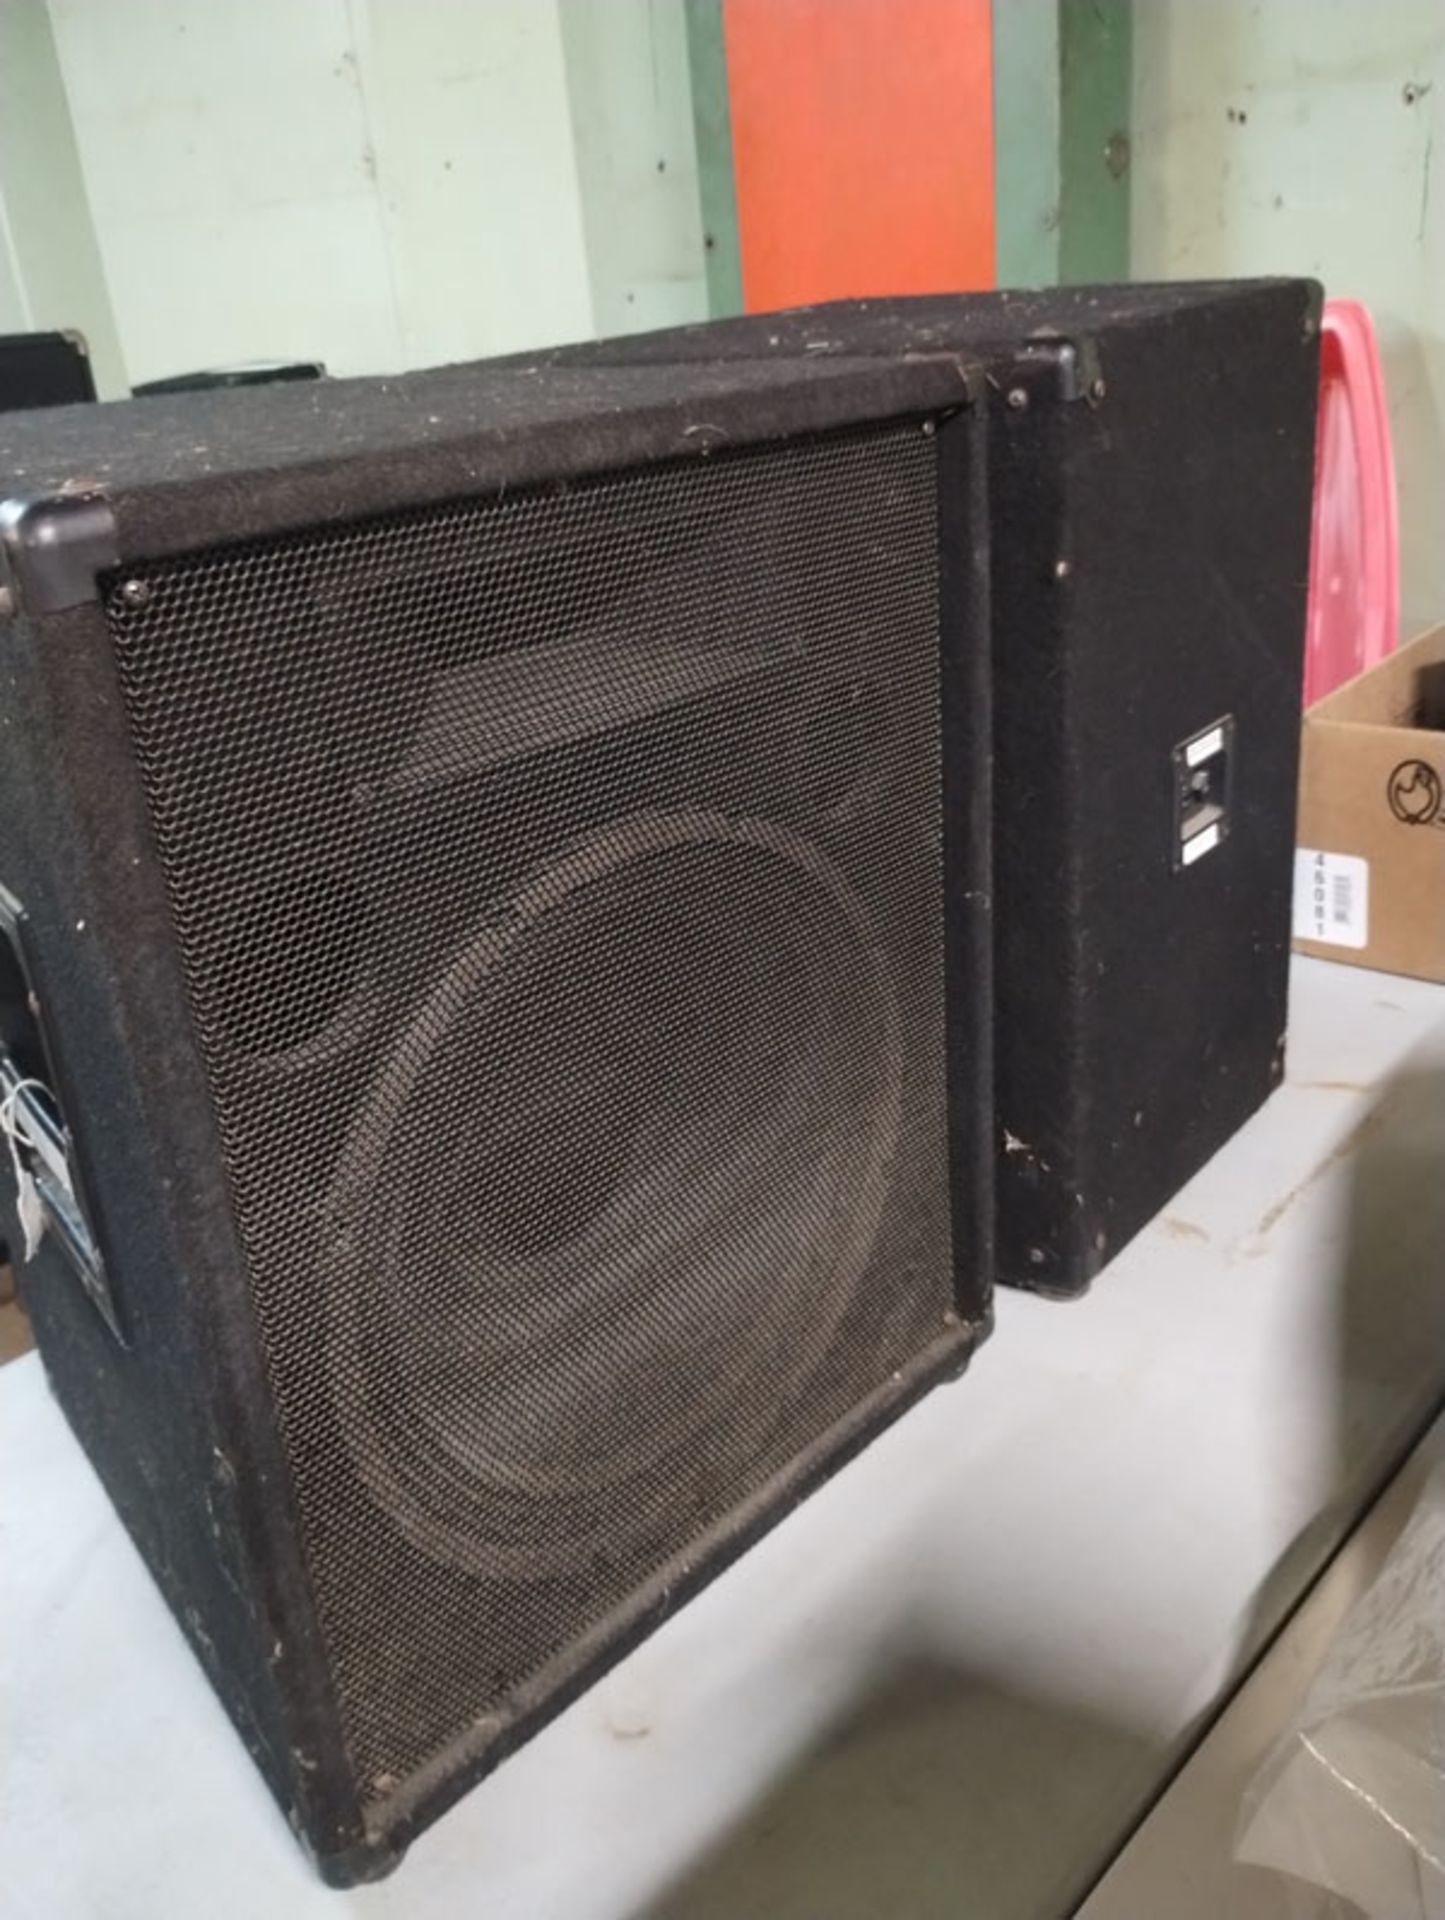 SET OF (2) 15" SPEAKERS - MODEL TRAP-115H-S1 , 250W (This lot of located at the Grossman warehouse - Image 7 of 8